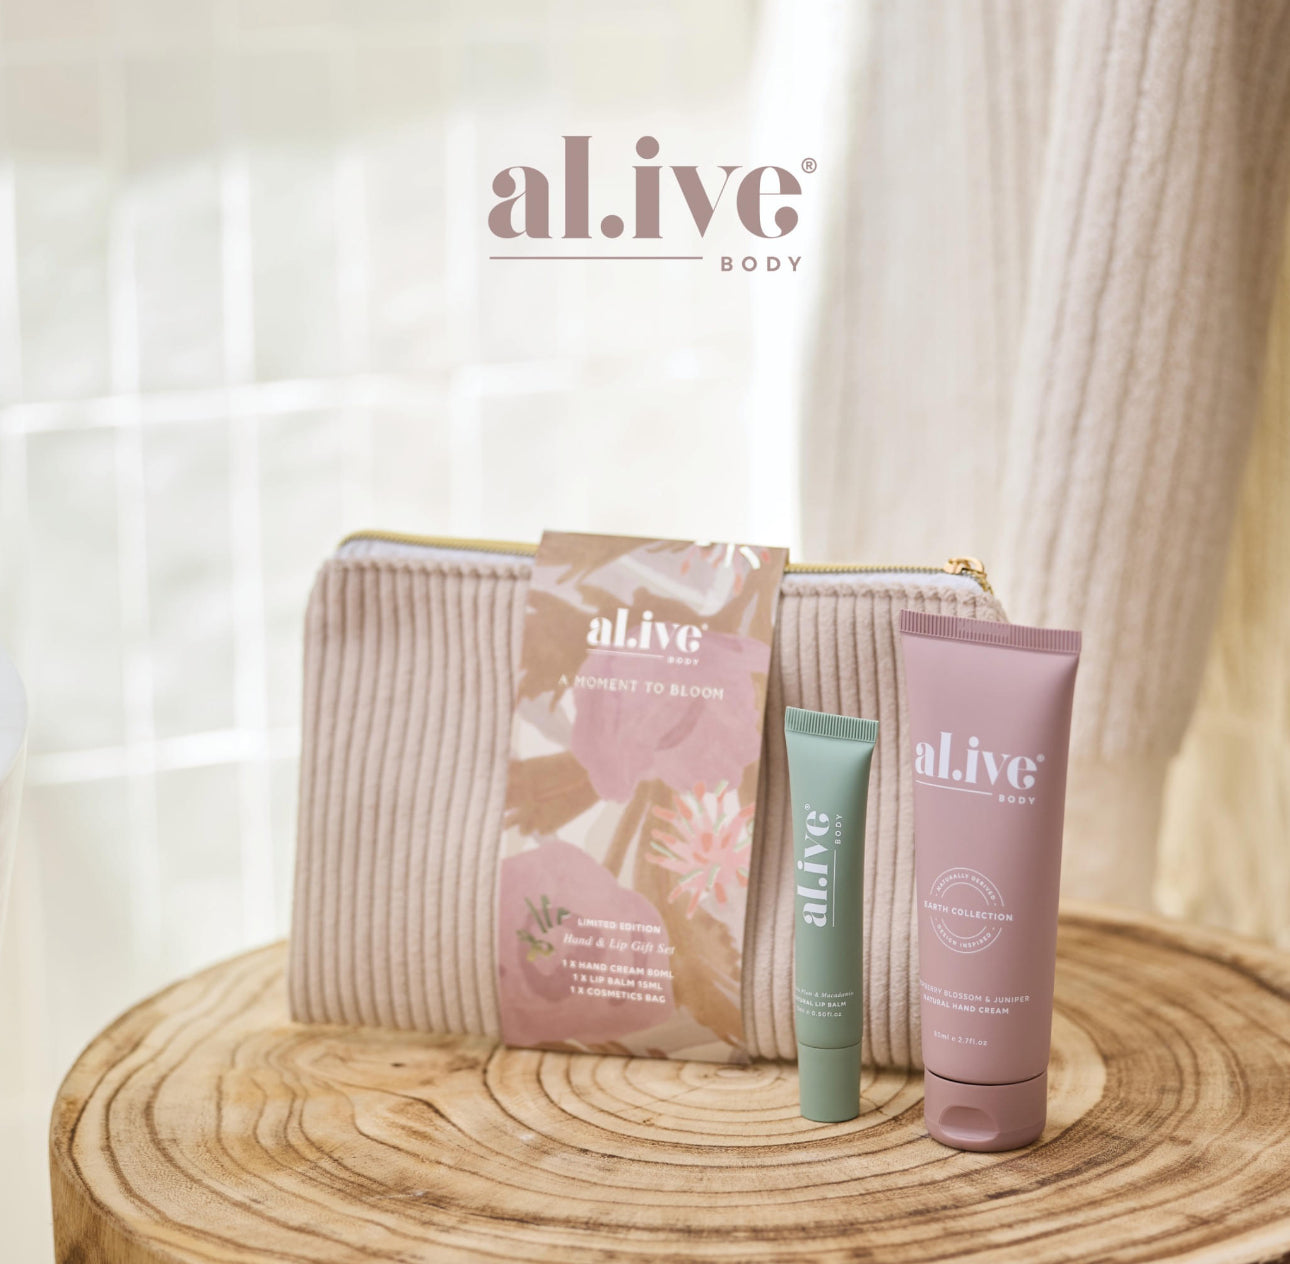 al.ive Hand and Lip Gift Set - A Moment To Bloom